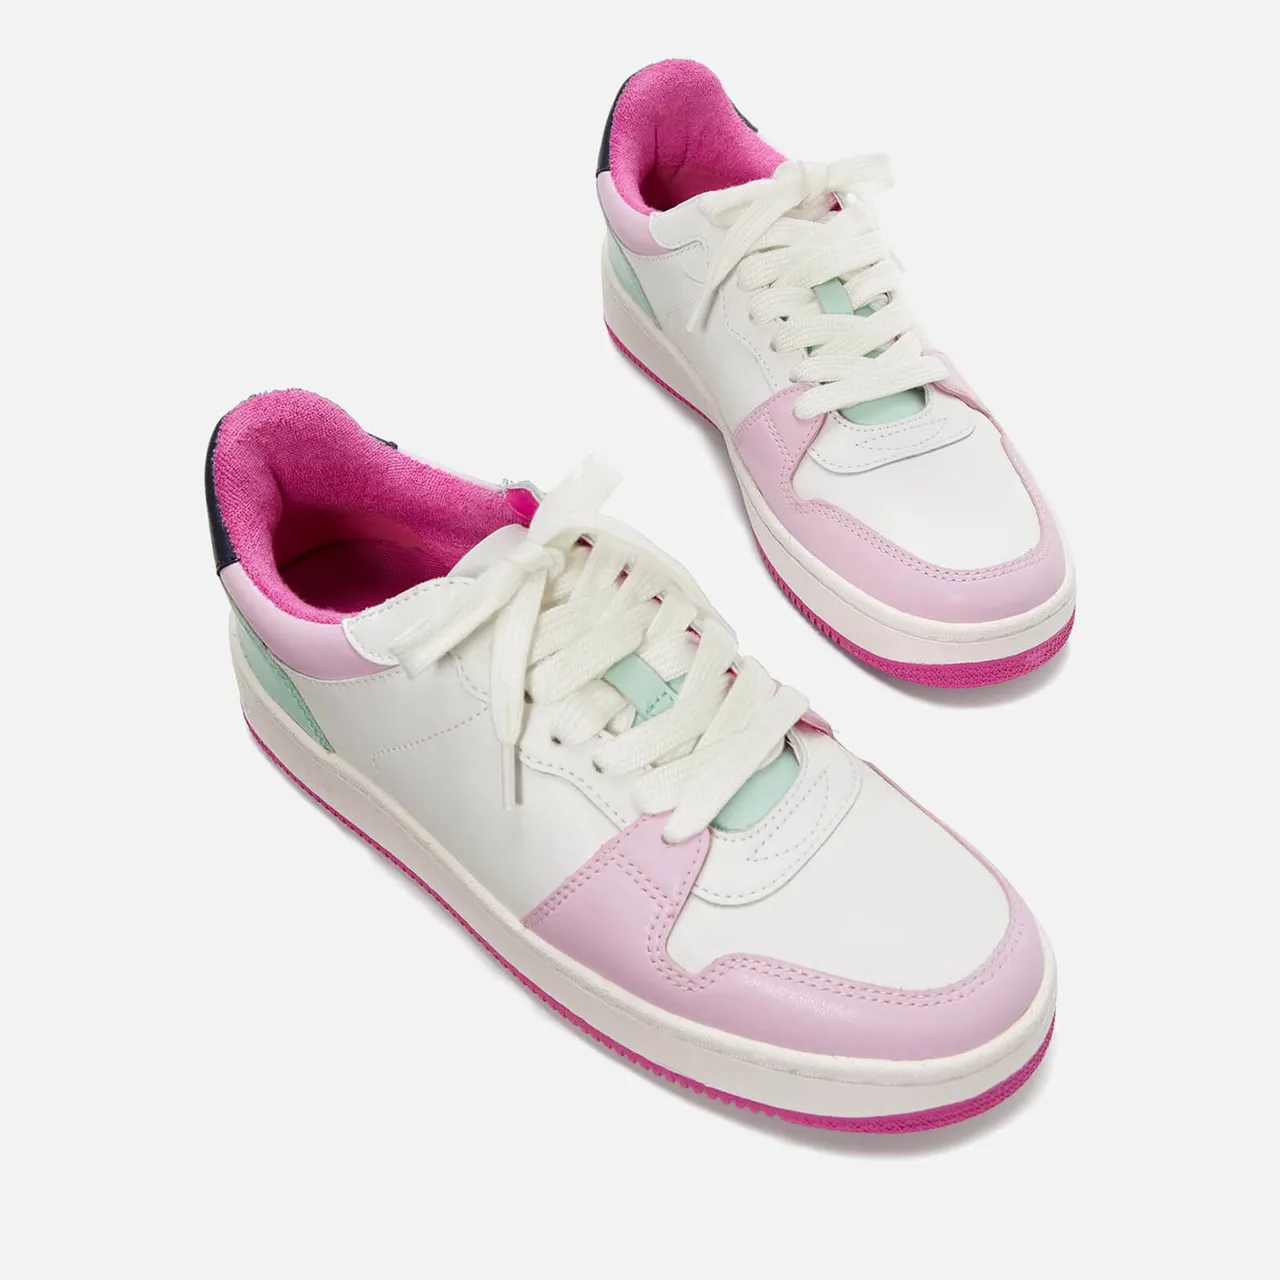 Kate Spade Women's New York Bolt Leather Trainers